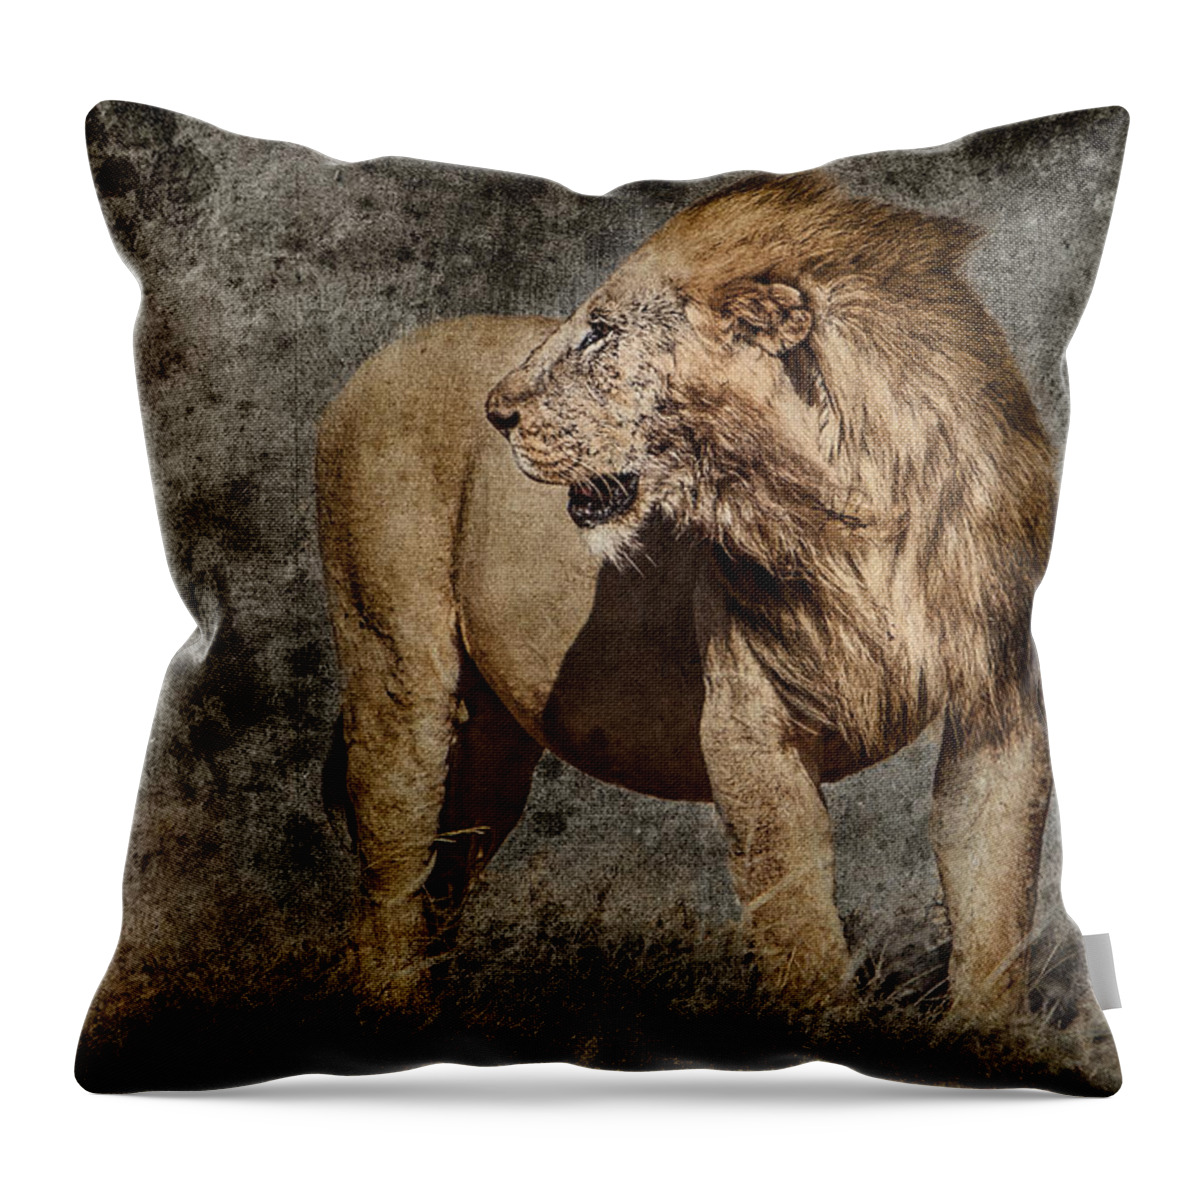 Africa Throw Pillow featuring the photograph Windswept Lion by Mike Gaudaur